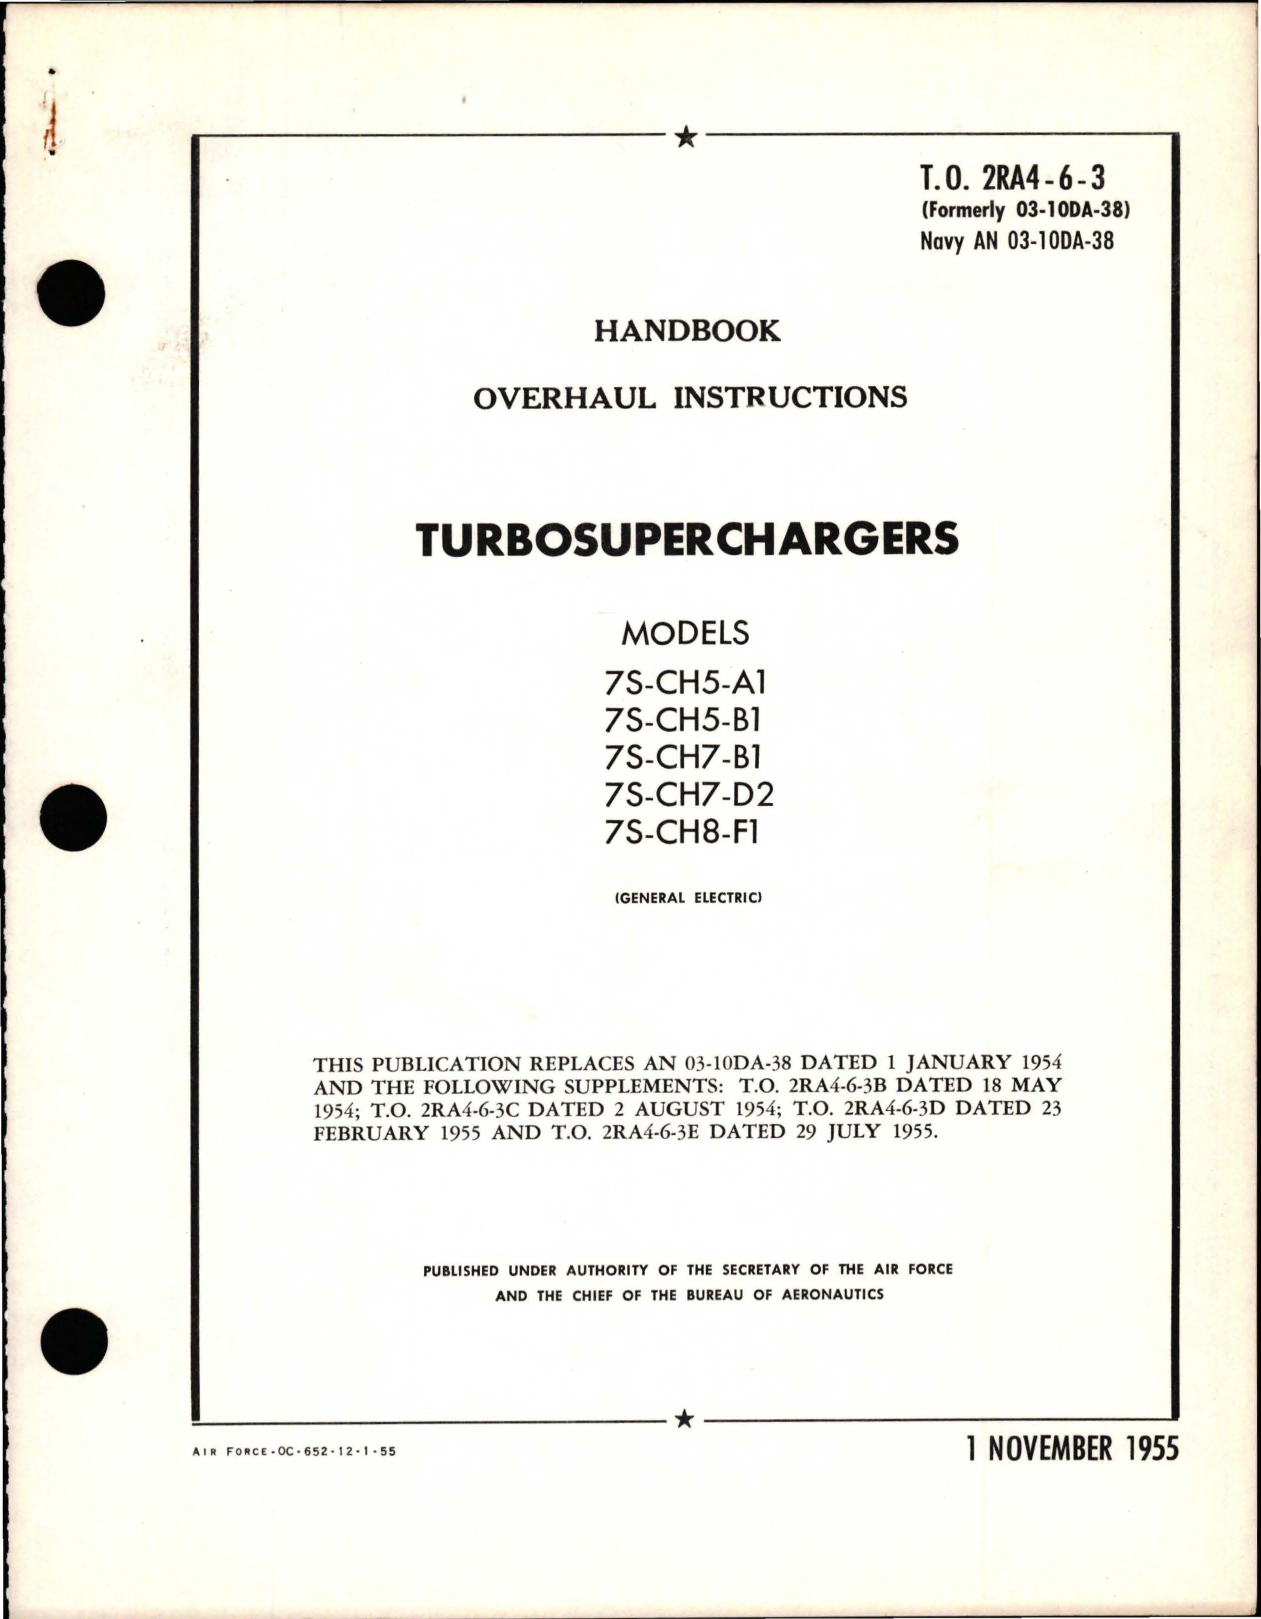 Sample page 1 from AirCorps Library document: Overhaul Instructions for Turbosuperchargers - Models 7S-CH5-A1, 7S-CH5-B1, 7S-CH7-B1, 7S-CH7-D2, and 7S-CH8-F1